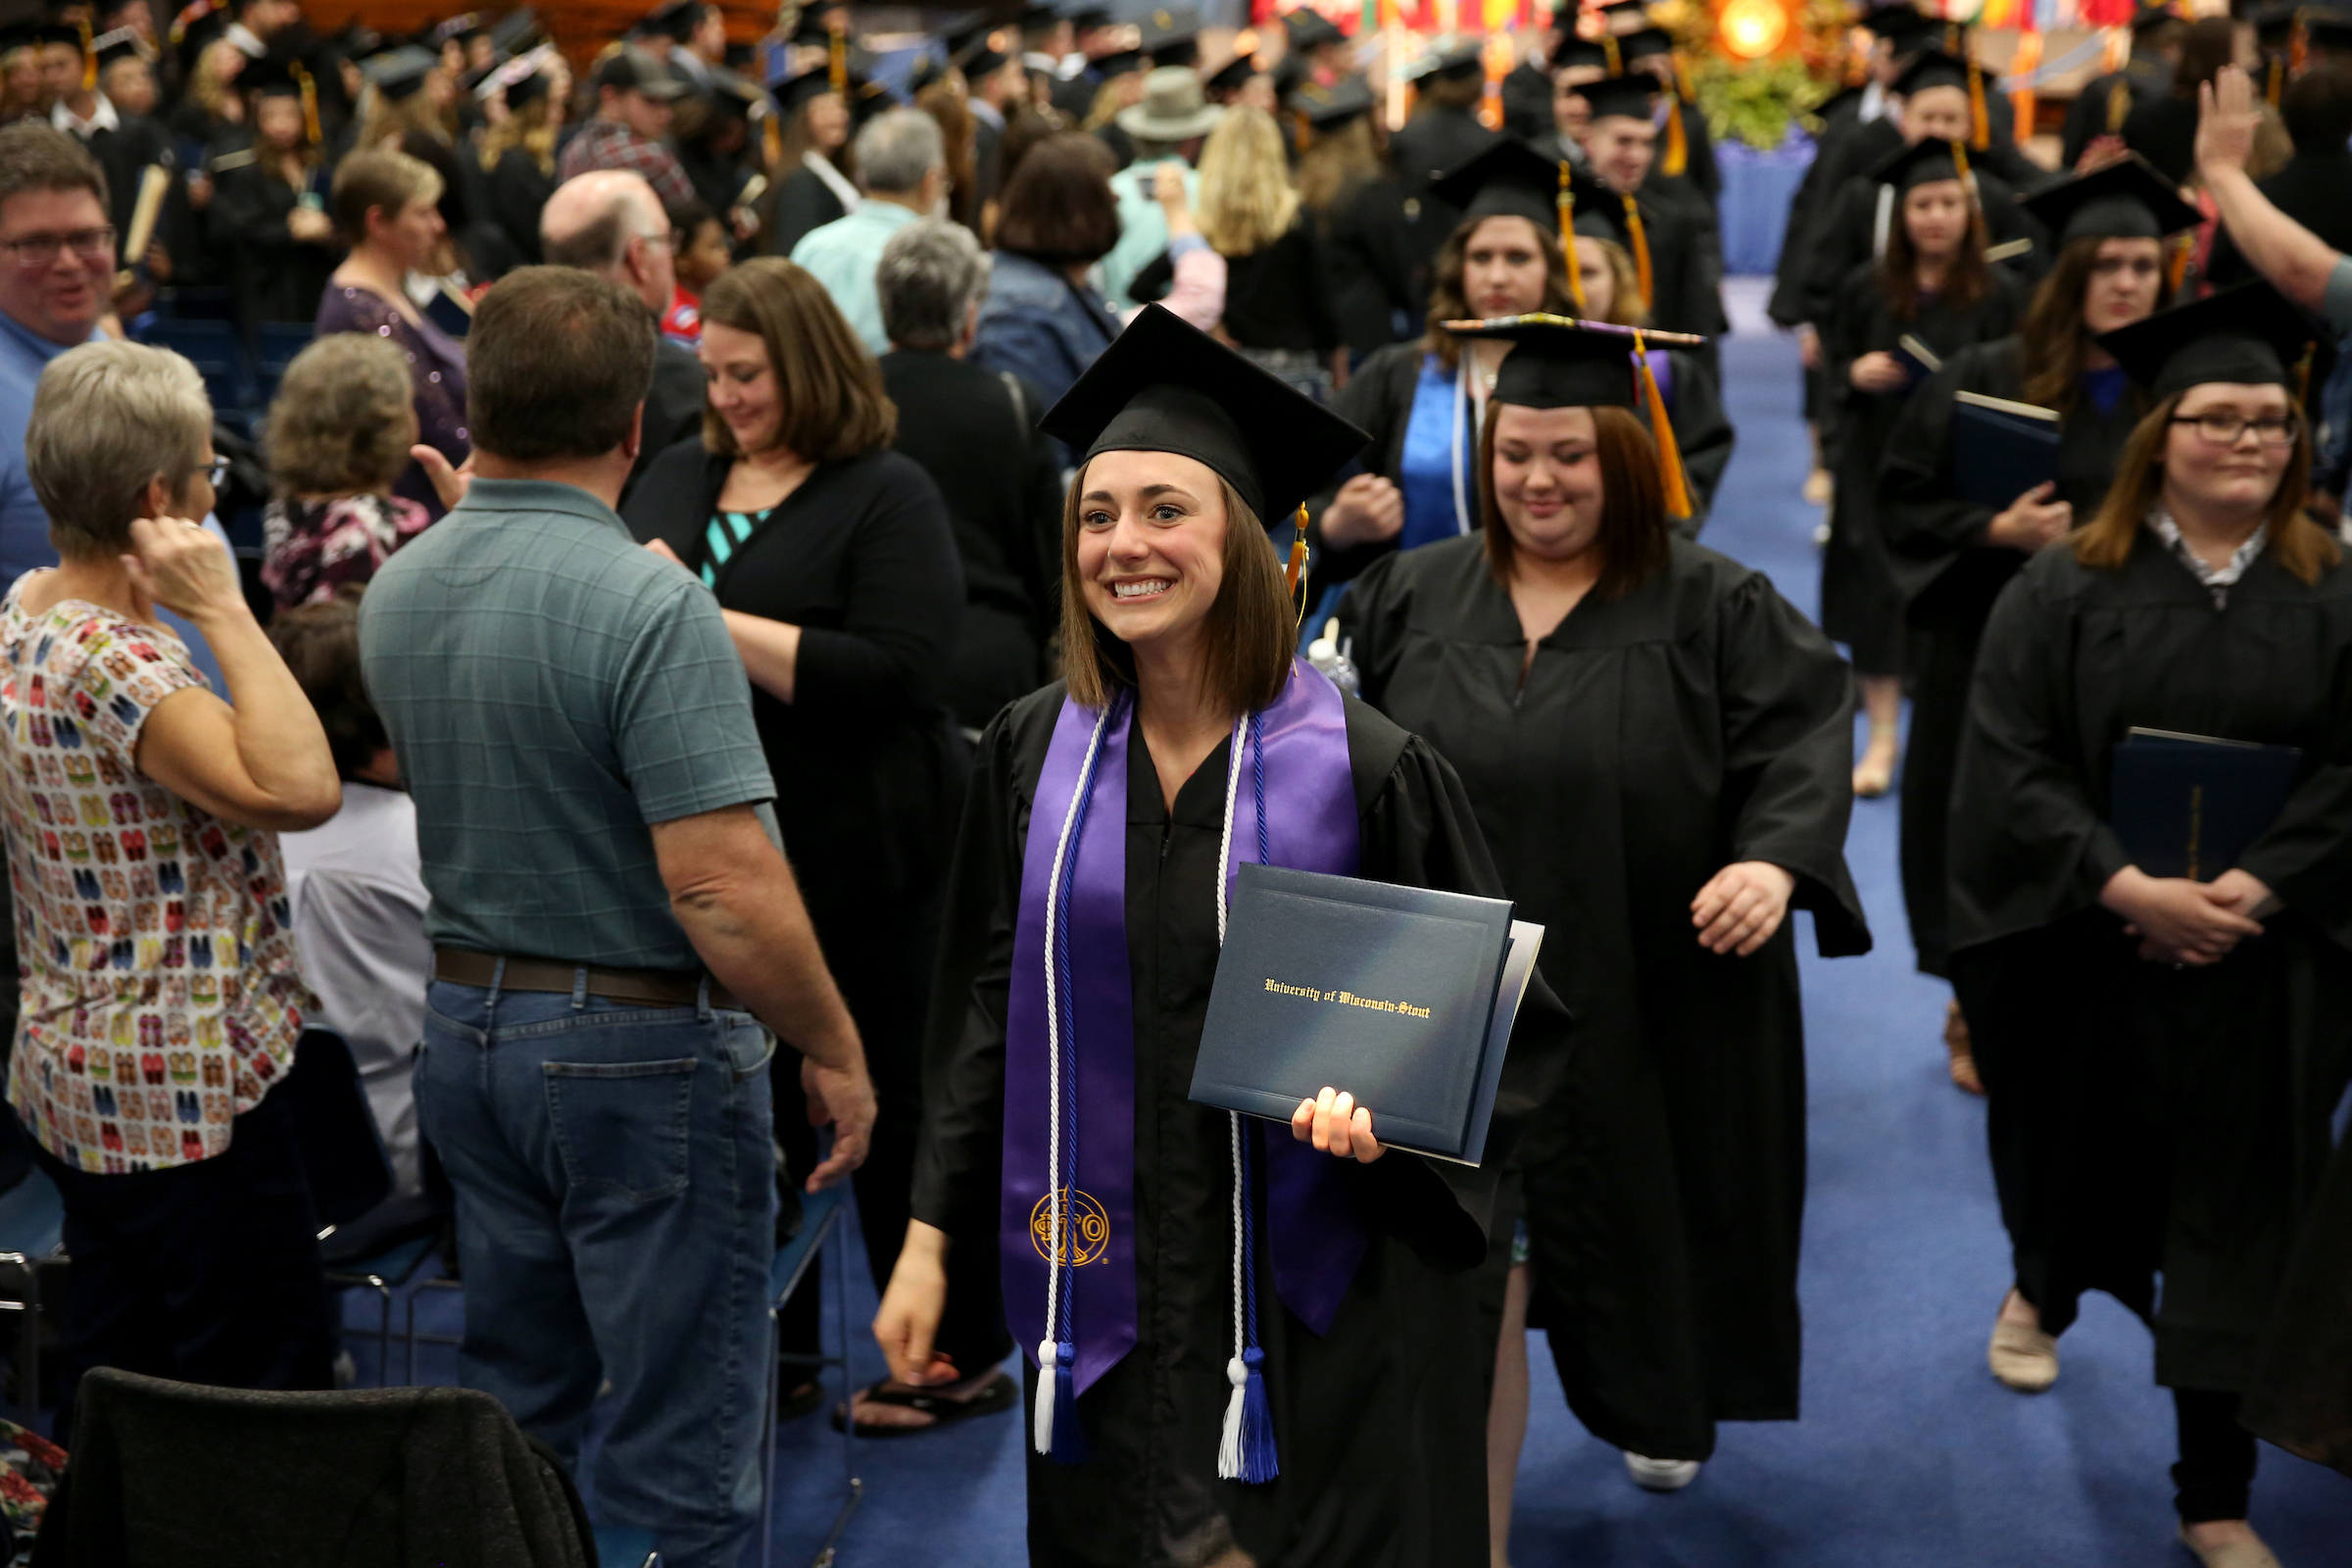 The spring Commencement ceremony is held for the College of Education, Hospitality, Health and Human Sciences in Johnson Fieldhouse.